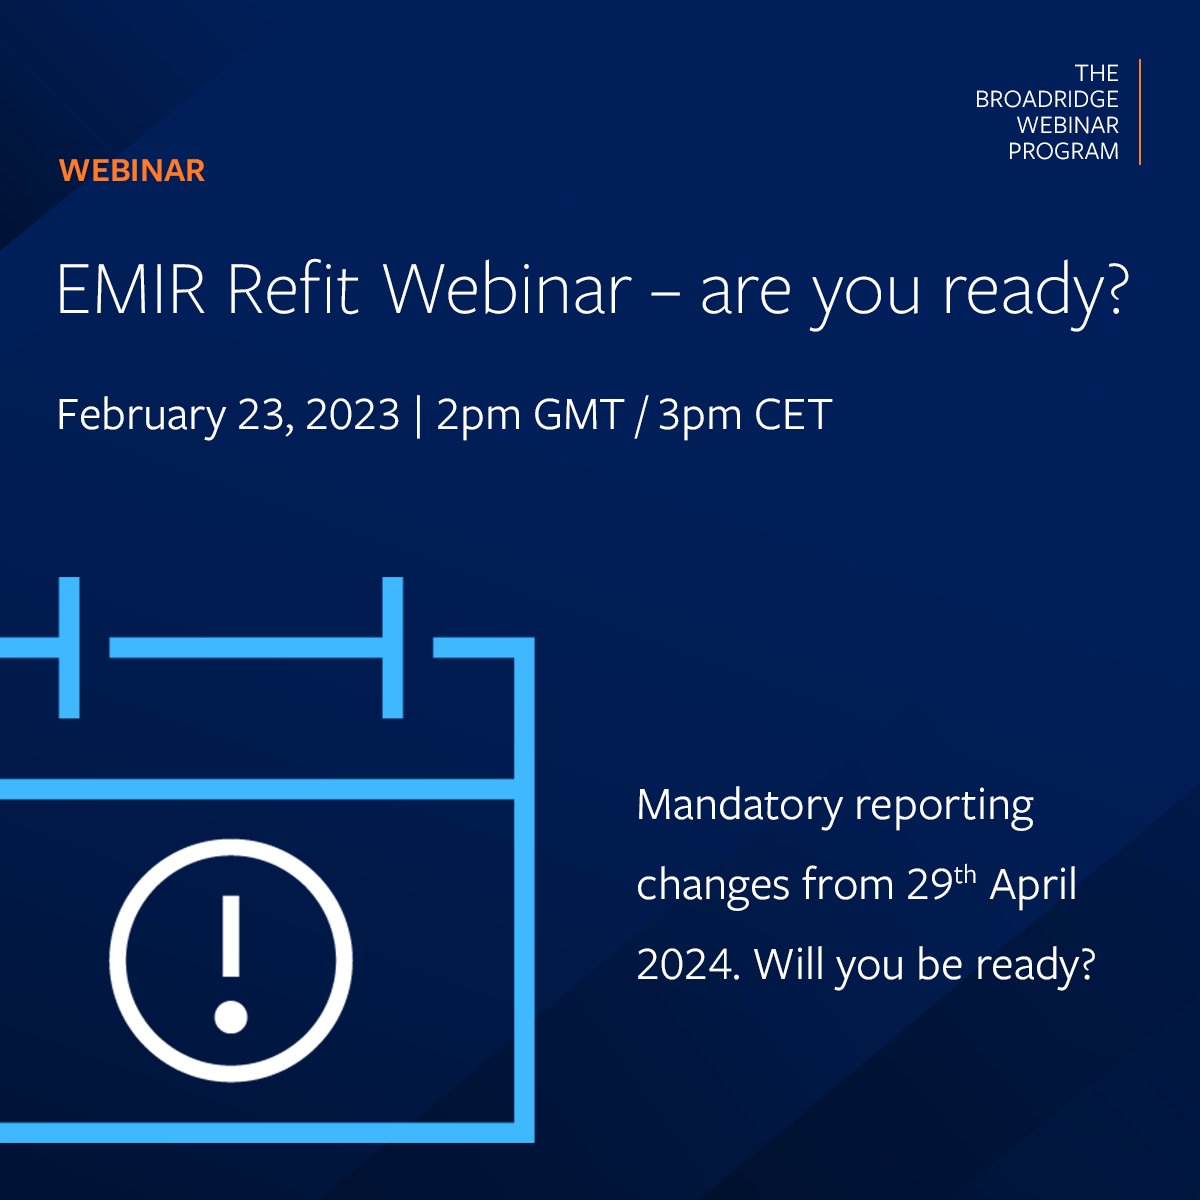 EMIR Refit goes live on 29th April 2024 and requires a significant change to the reportable fields and other important changes. Register for this webinar now to learn how you can future-proof your reporting set-up.

#EMIRRefit   bit.ly/3ImPlfh